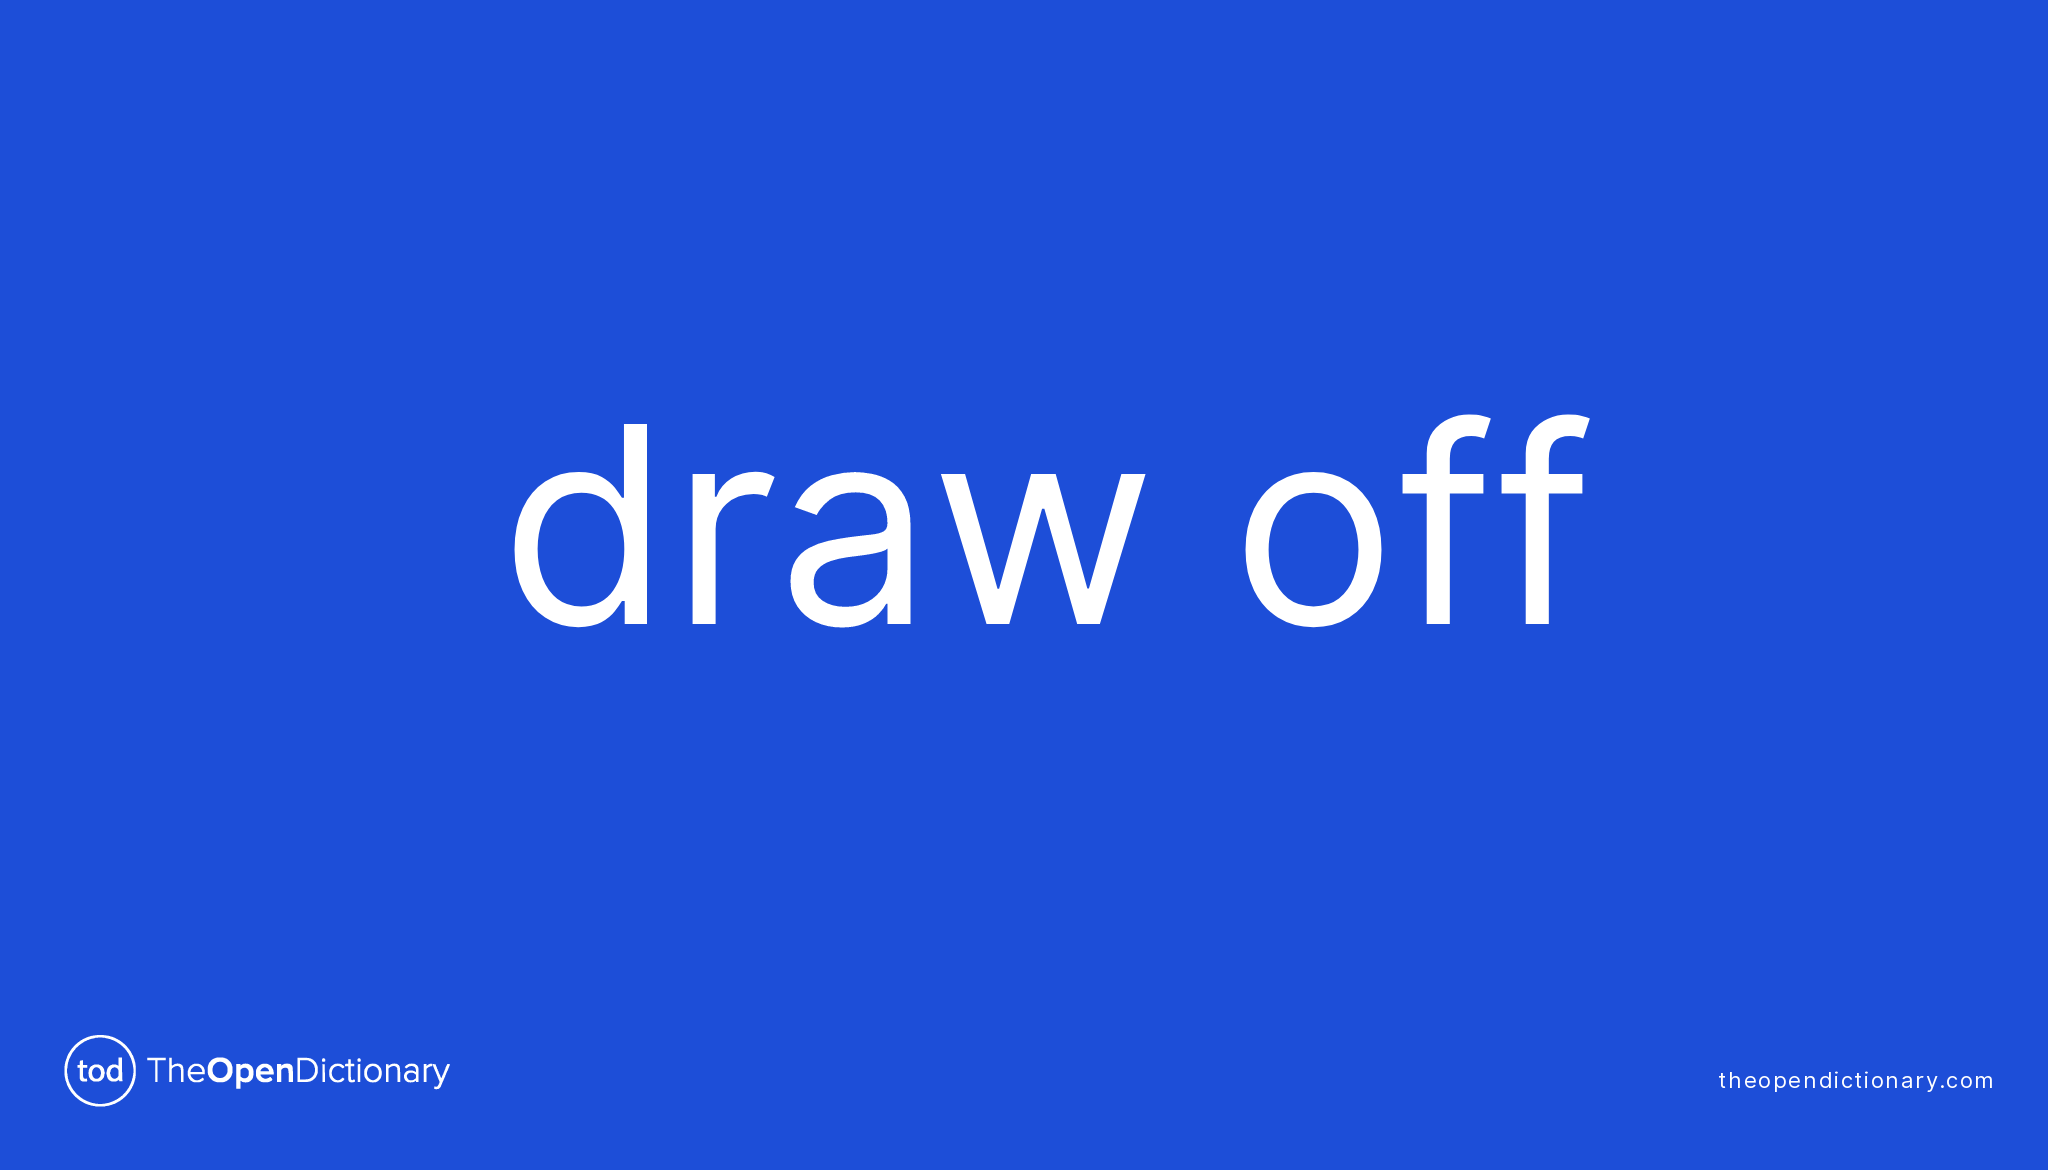 DRAW OFF Phrasal Verb DRAW OFF Definition, Meaning and Example